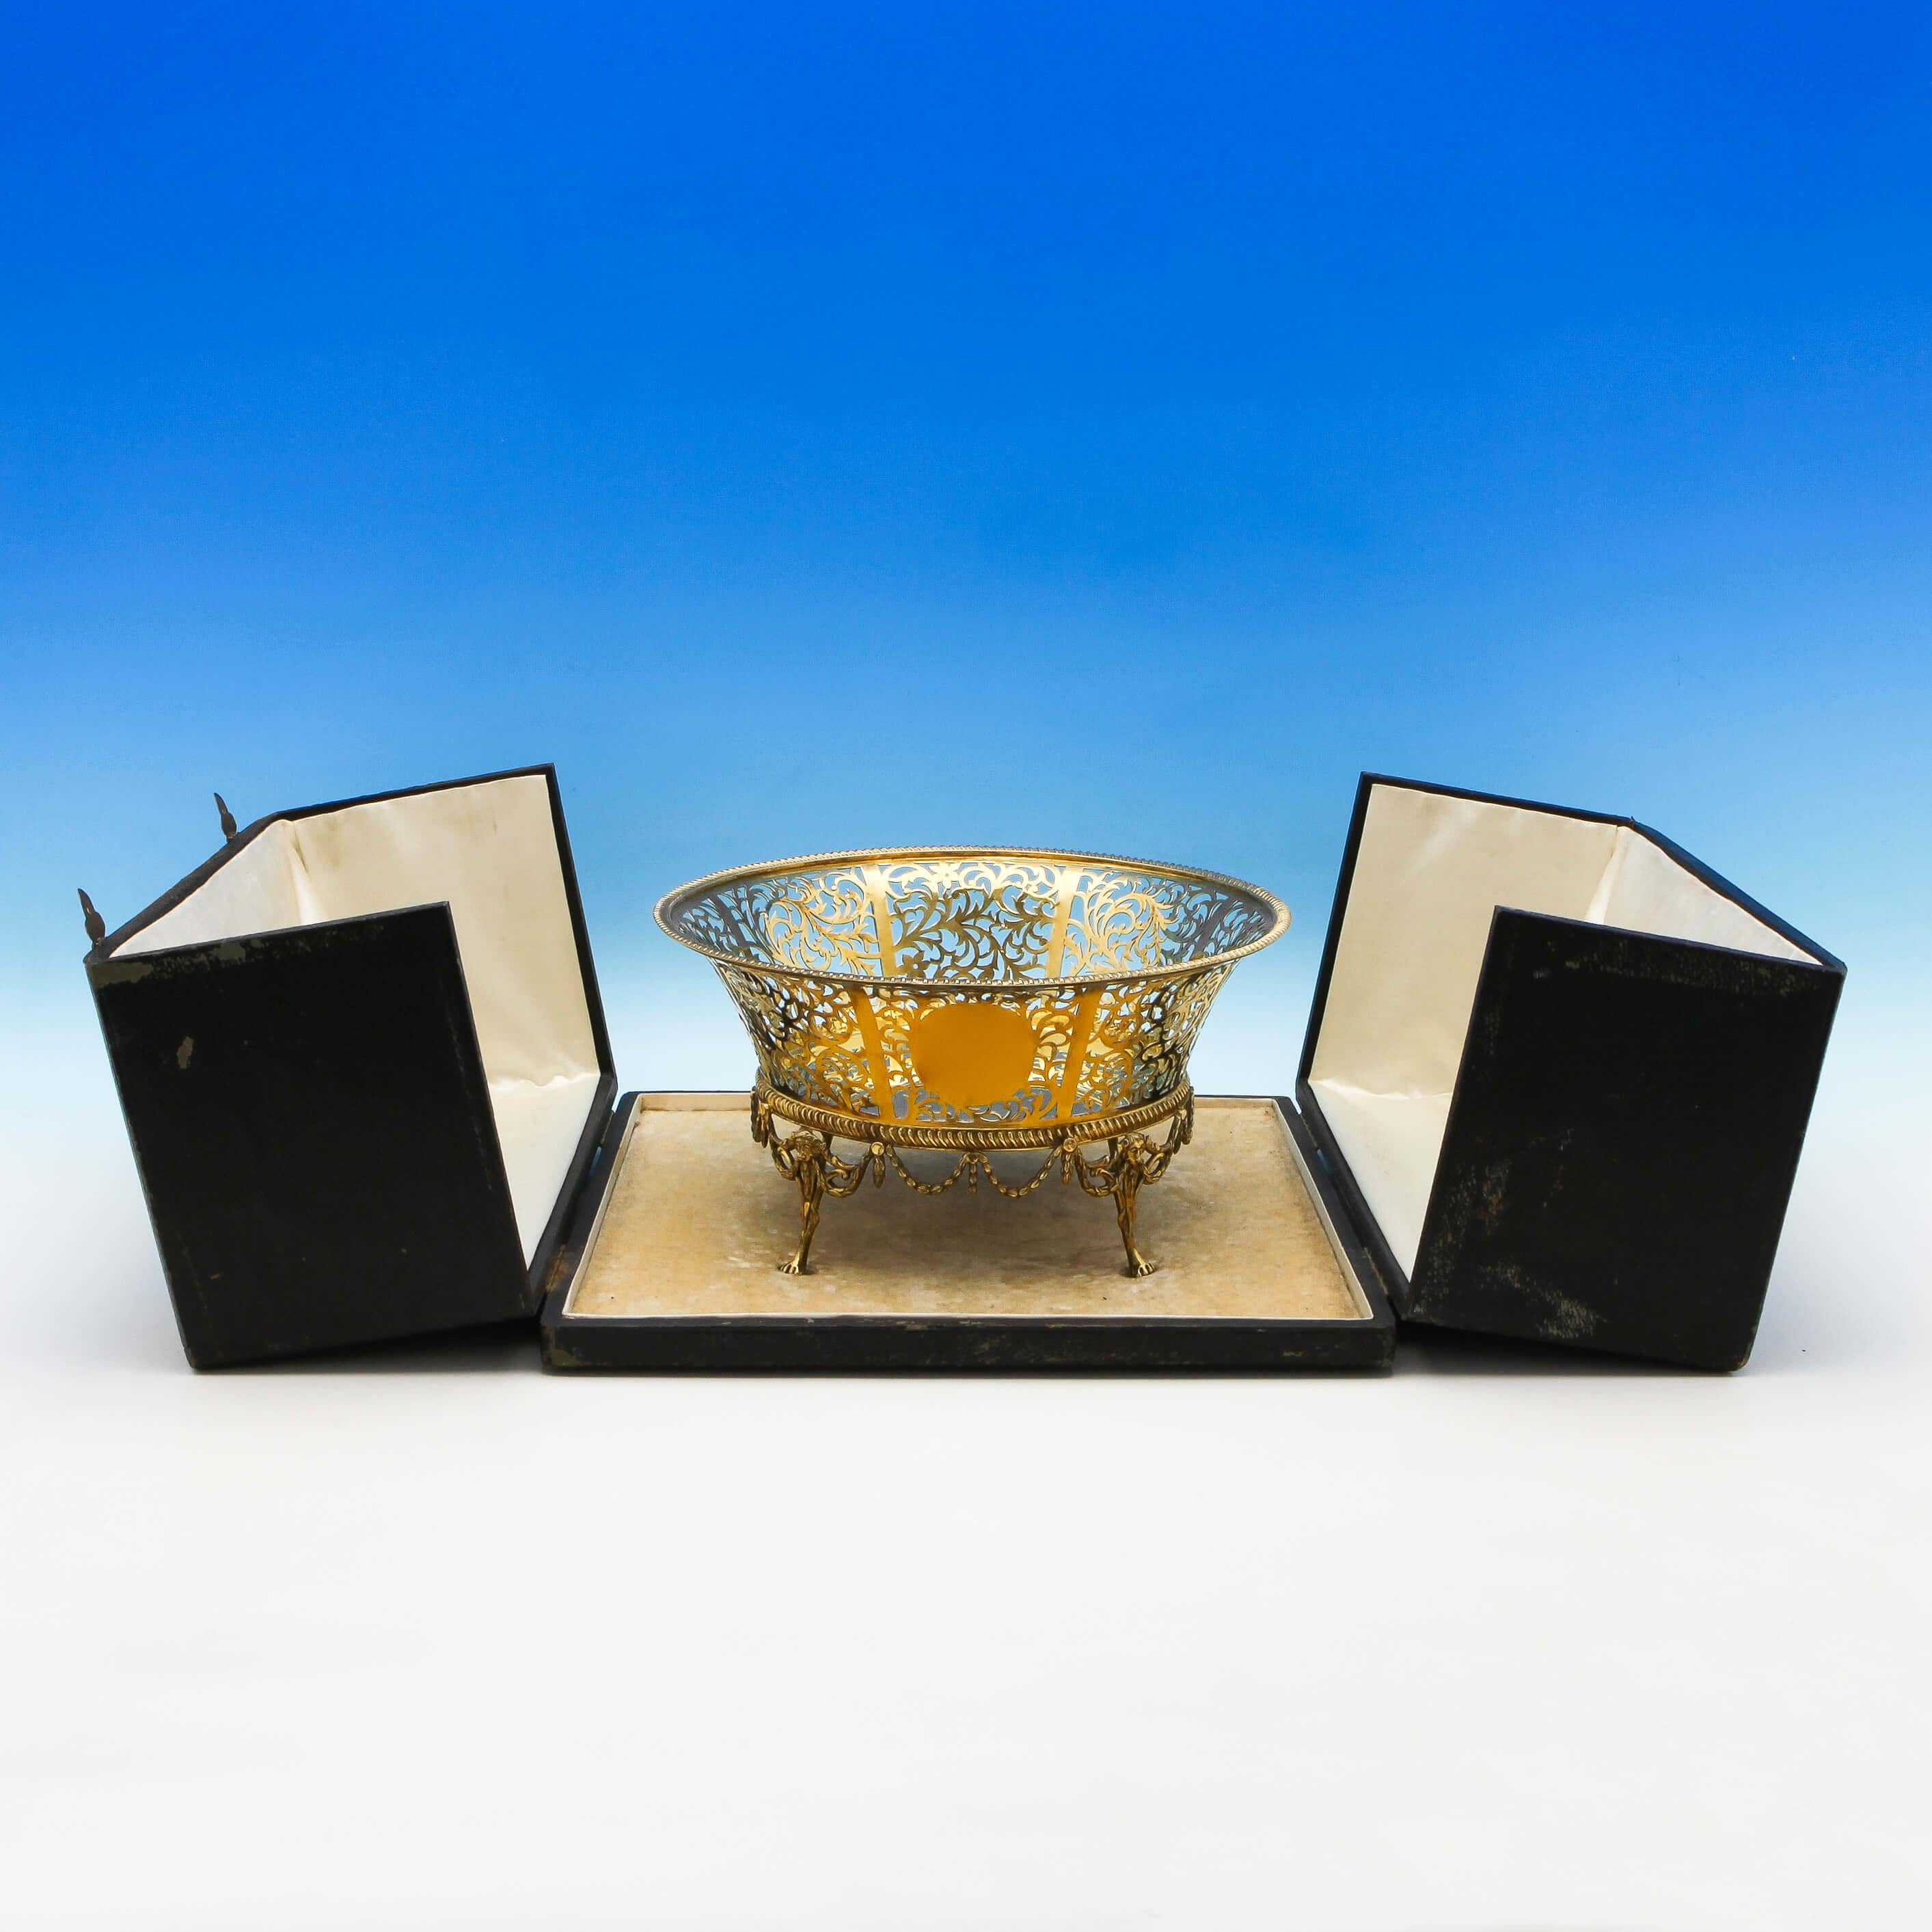 Hallmarked in London in 1909 by Goldsmiths & Silversmiths Co., this striking, Edwardian, antique sterling silver bowl, is gold-plated and features pierced decoration throughout, cast and applied legs, and is presented in its original fitted box. The